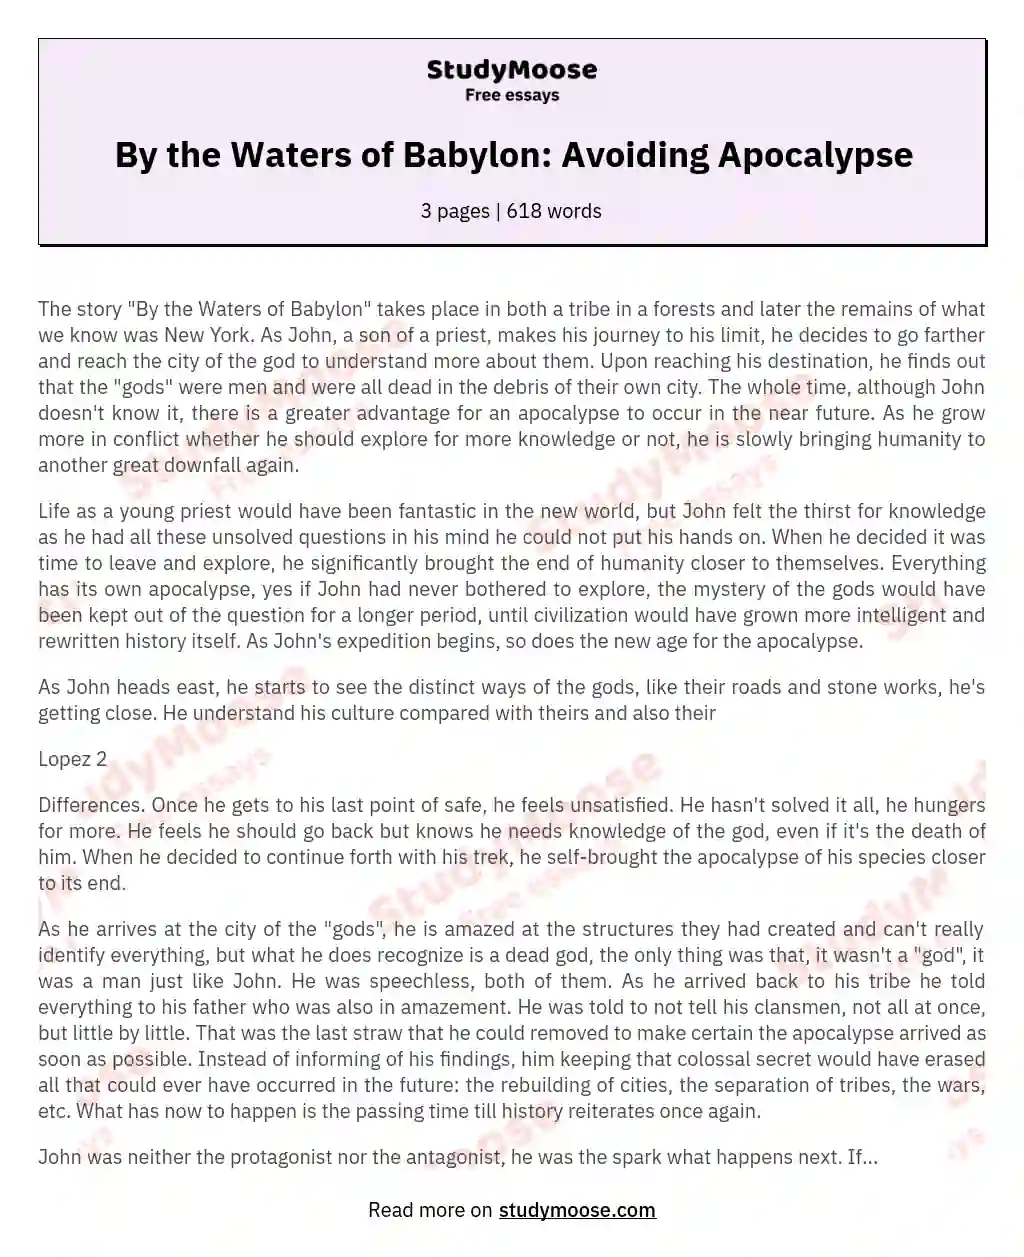 By the Waters of Babylon: Avoiding Apocalypse